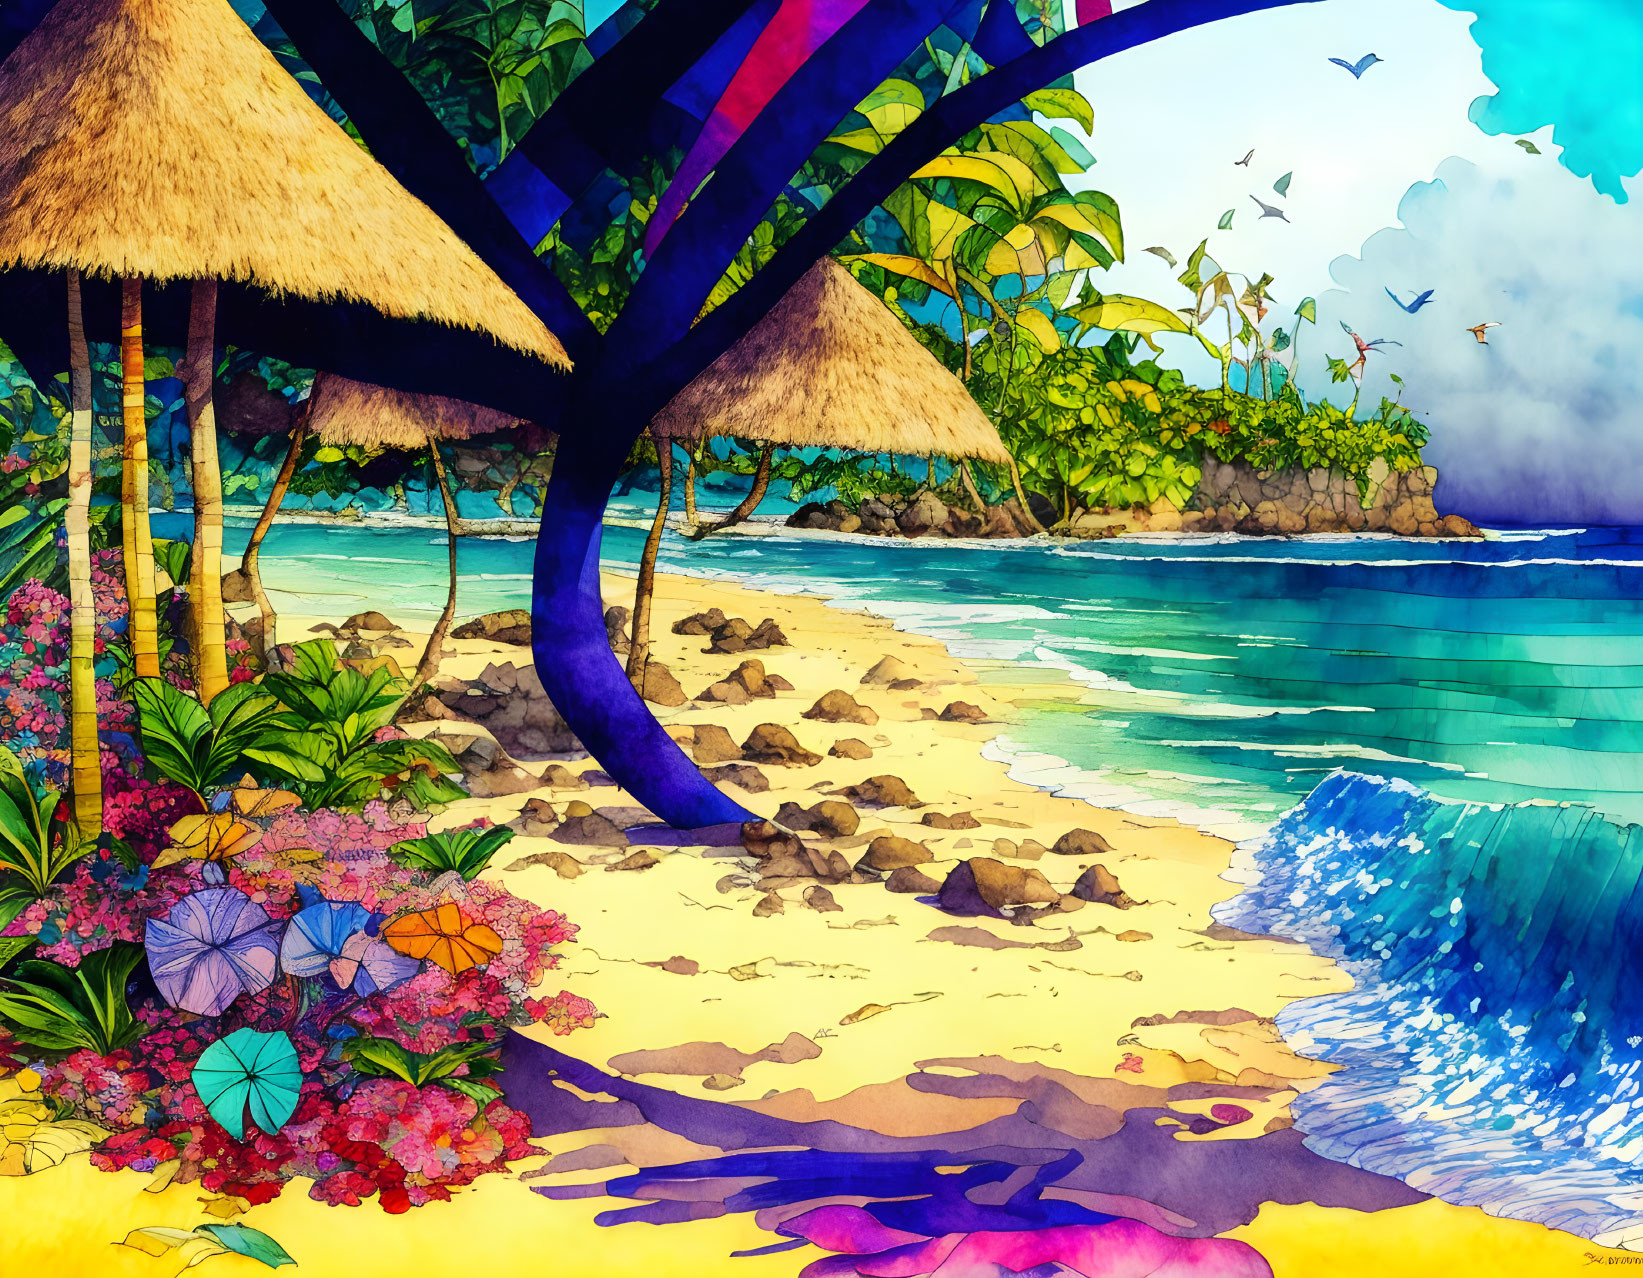 Colorful Beach Scene with Thatched Umbrellas, Flowers, Rocks, and Waves